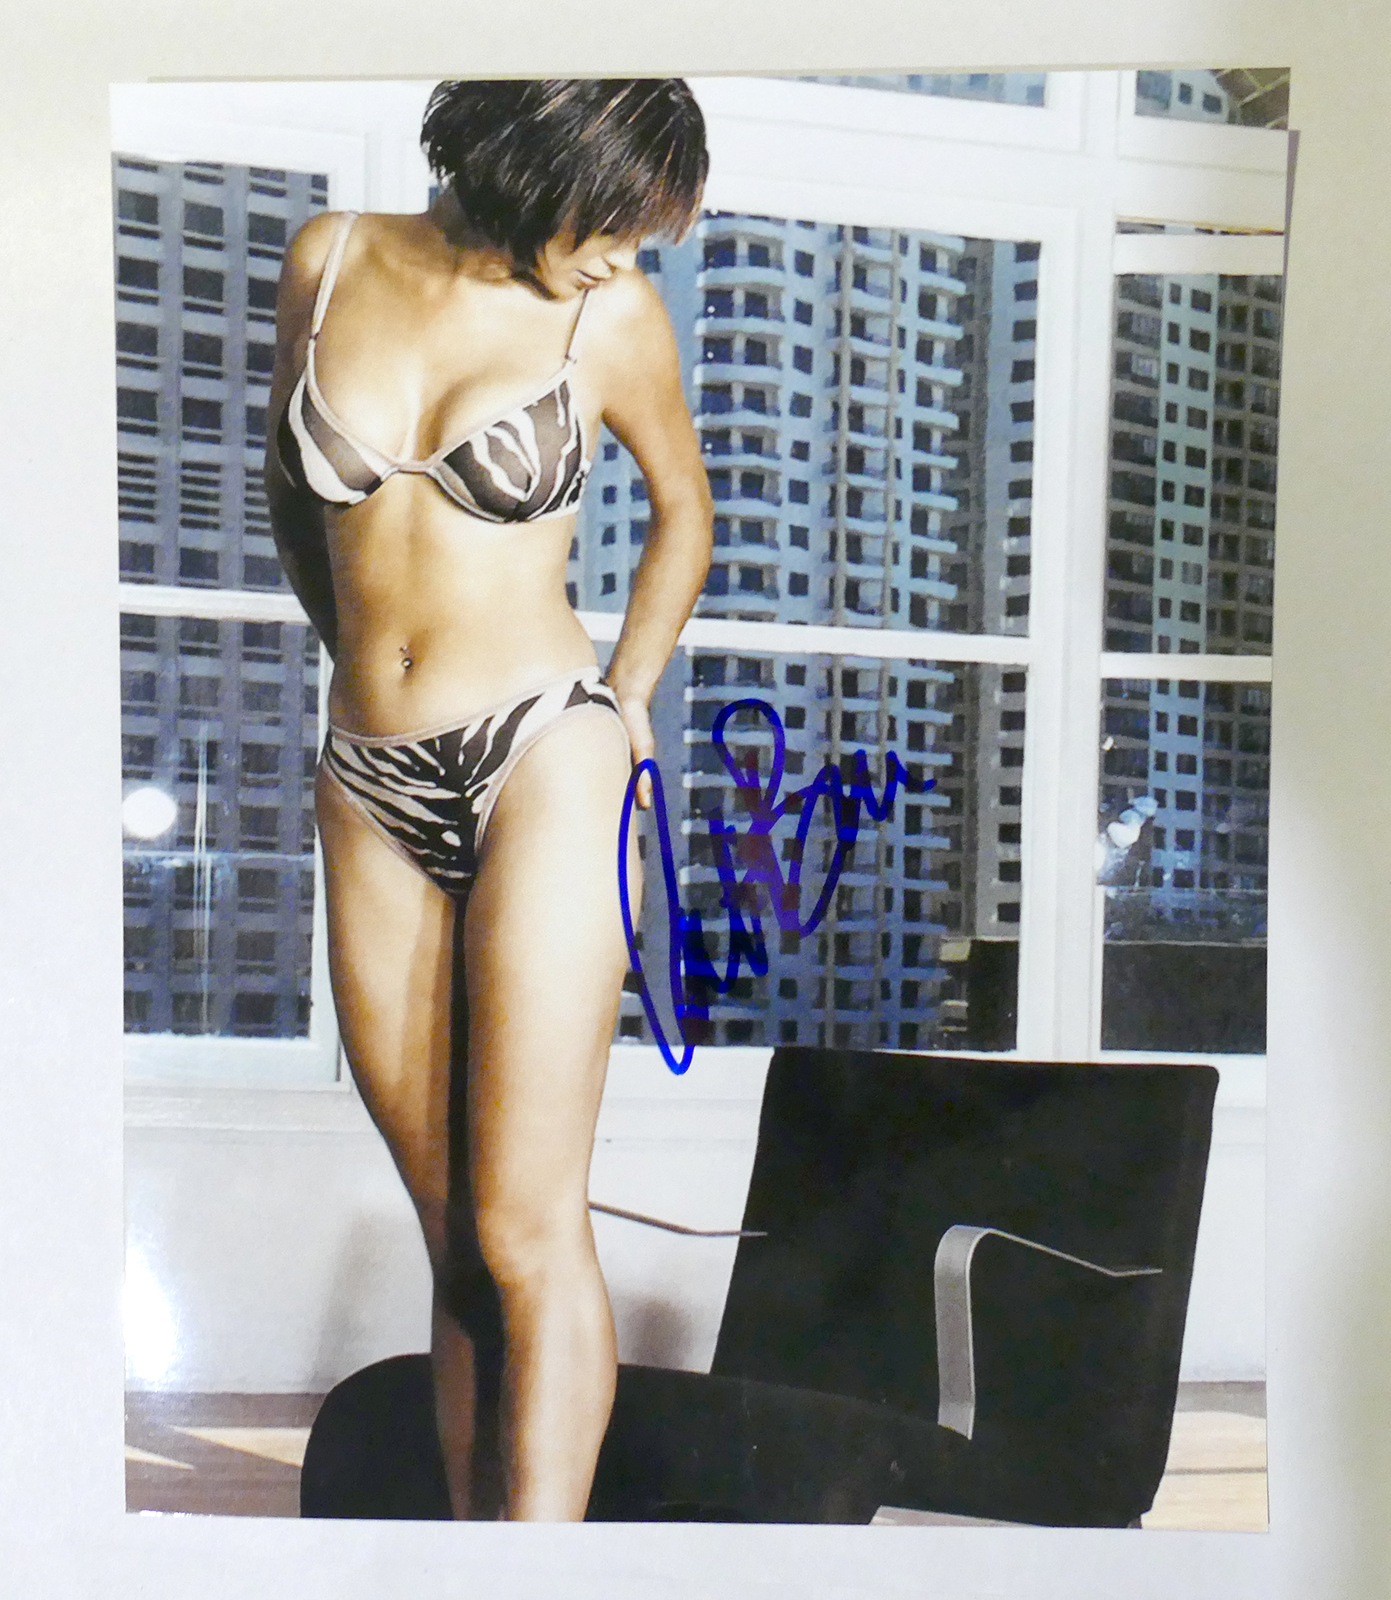 CATHERINE BELL AUTOGRAPHED SIGNED A4 PP POSTER PHOTO PRINT 19 